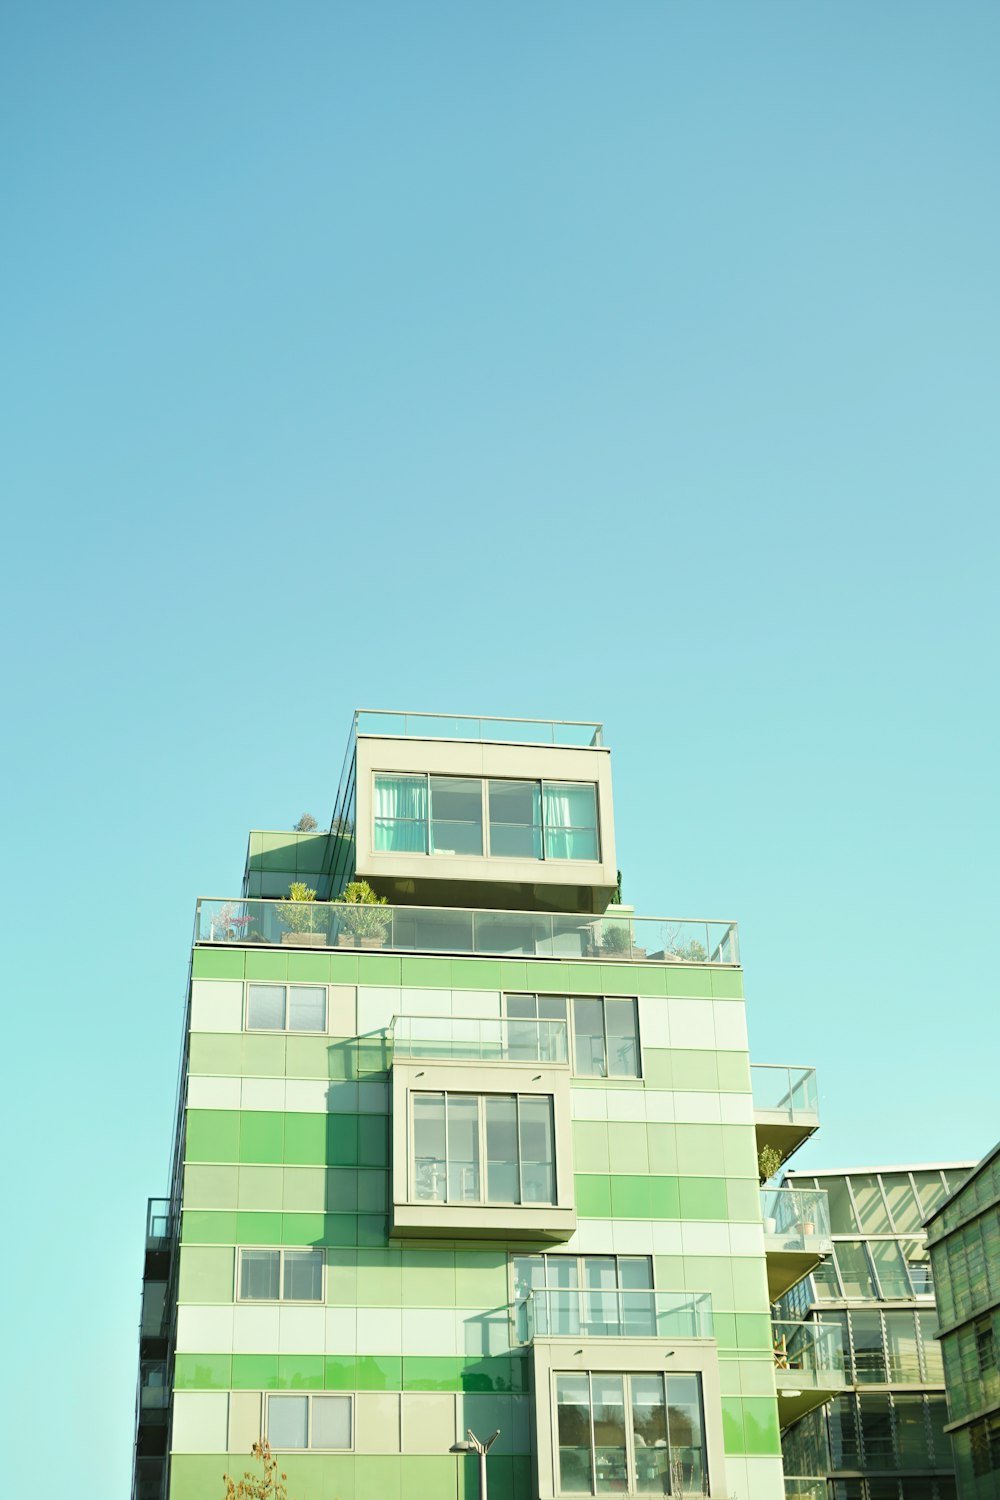 a tall green building with balconies on top of it